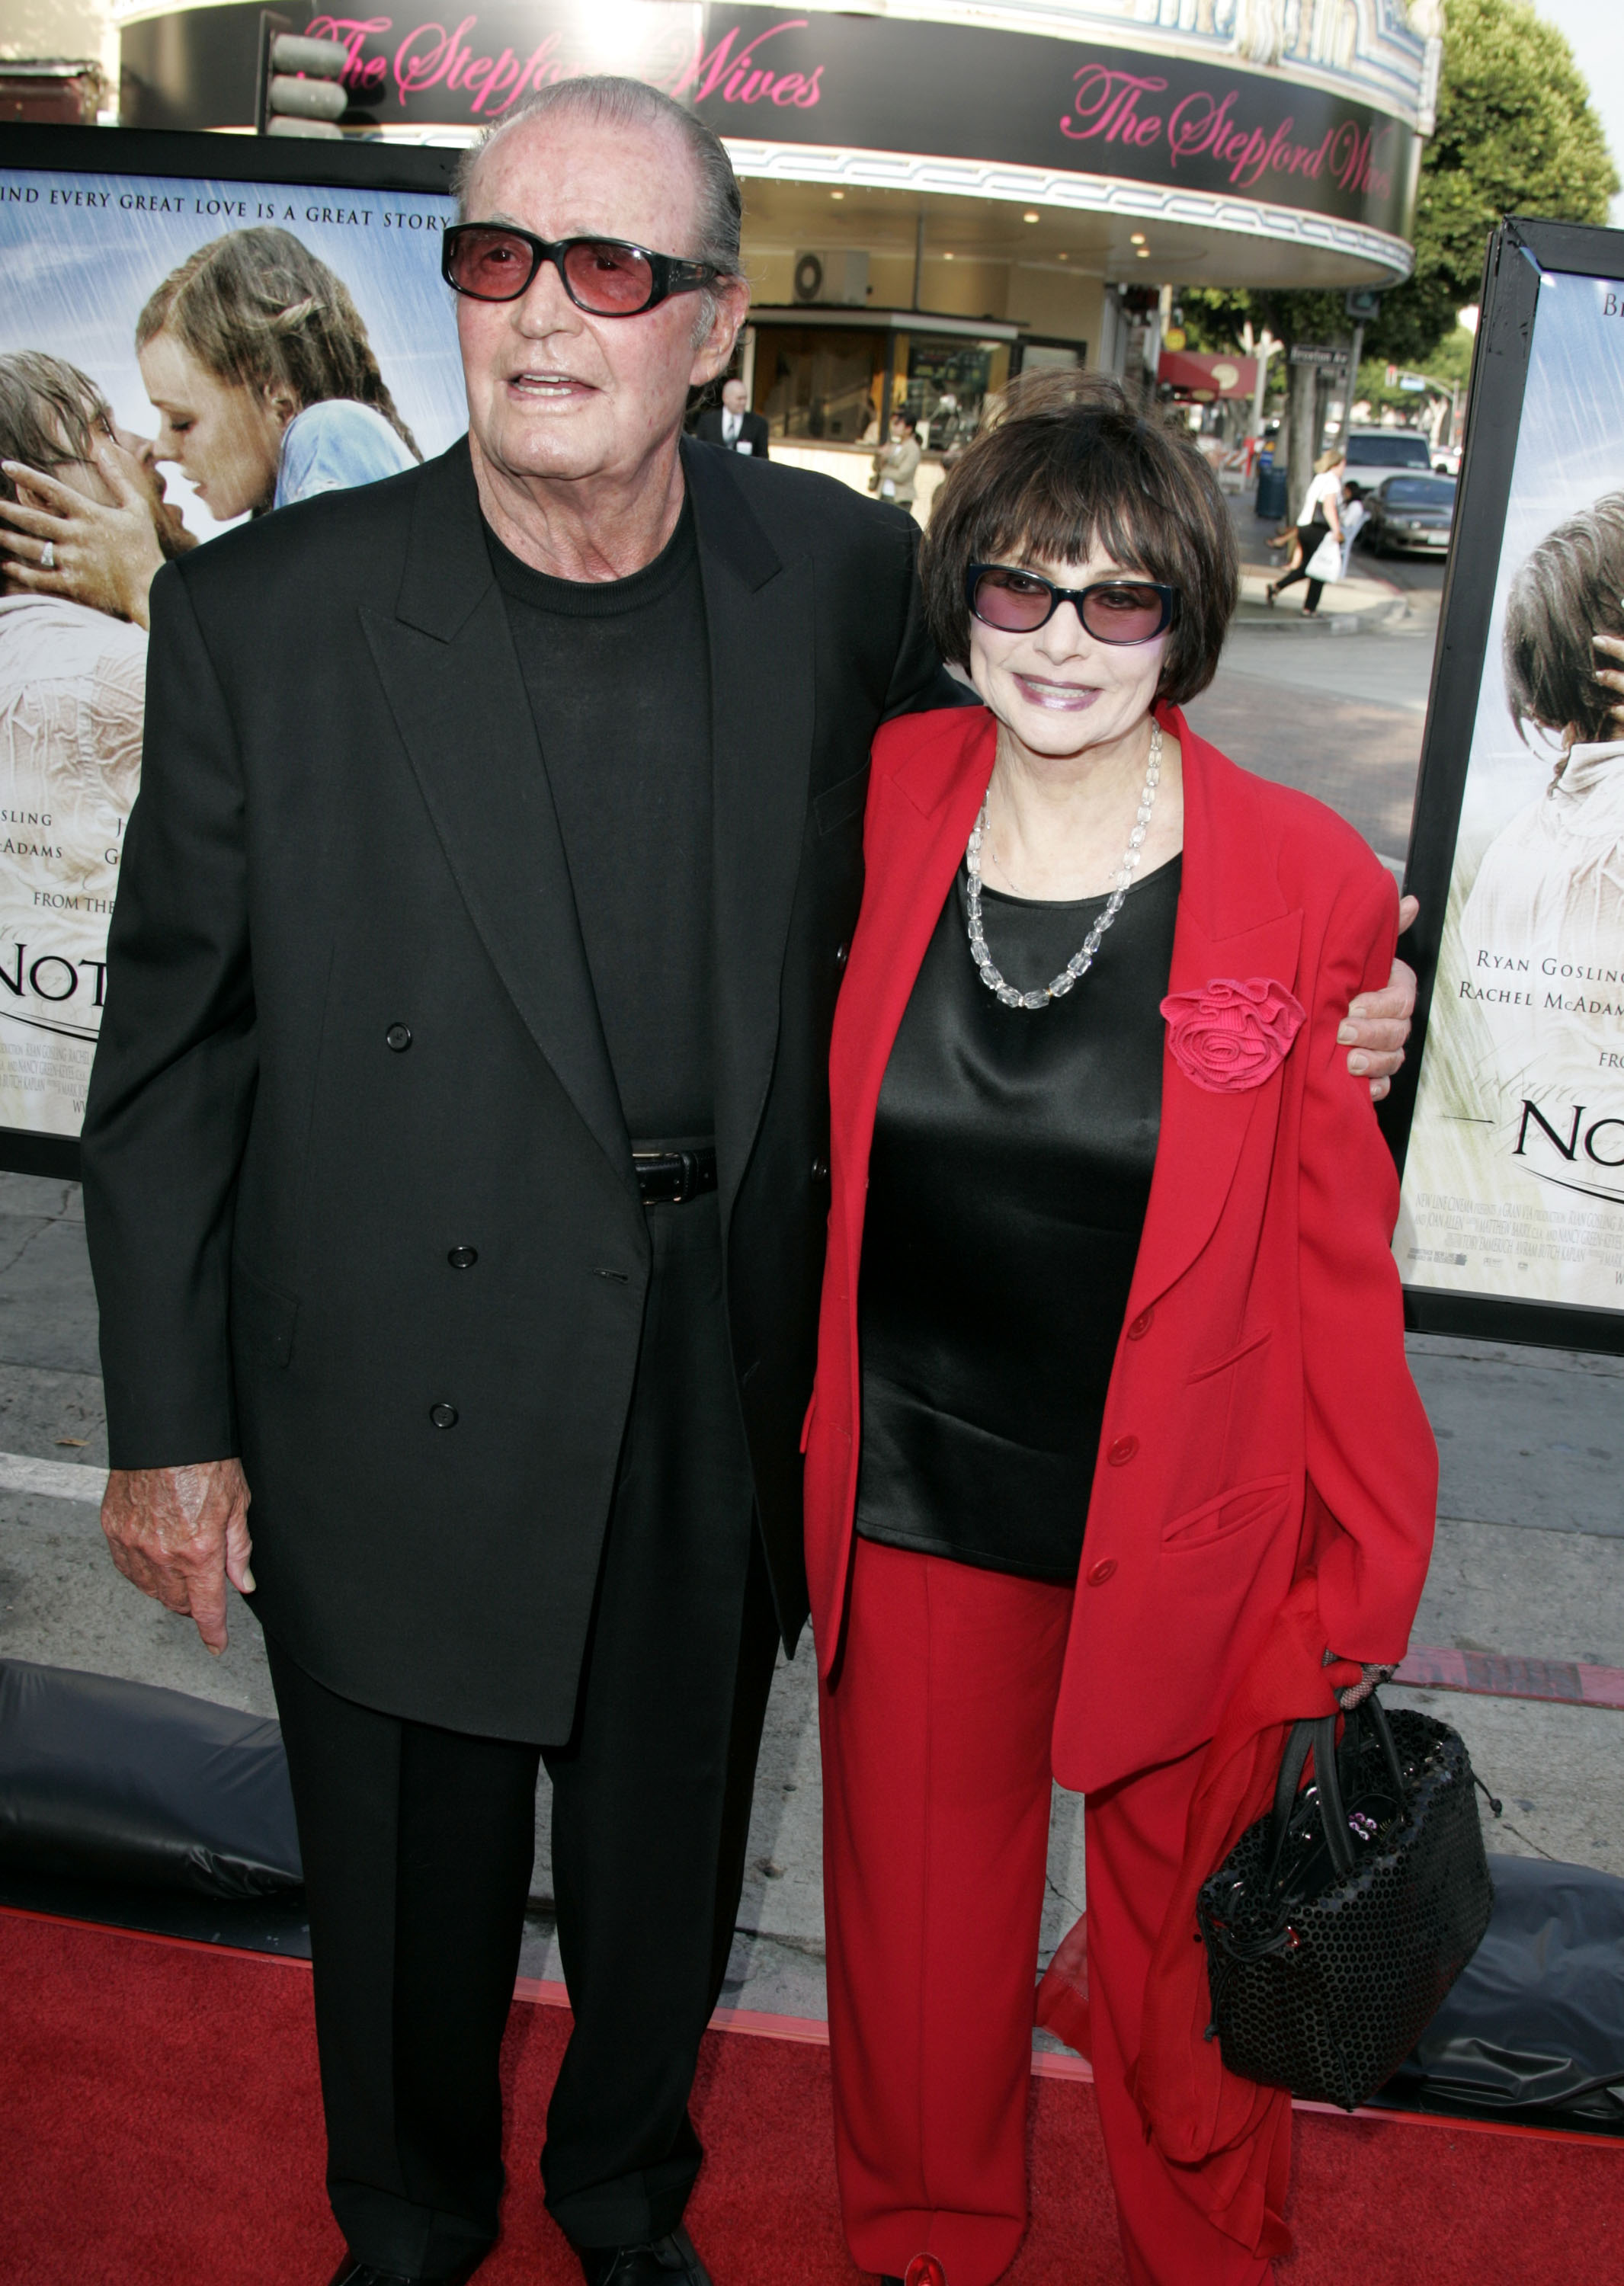 James Garner and wife Lois at Mann Village Theatre in Westwood, California, on June 21, 2004 | Source: Getty Images